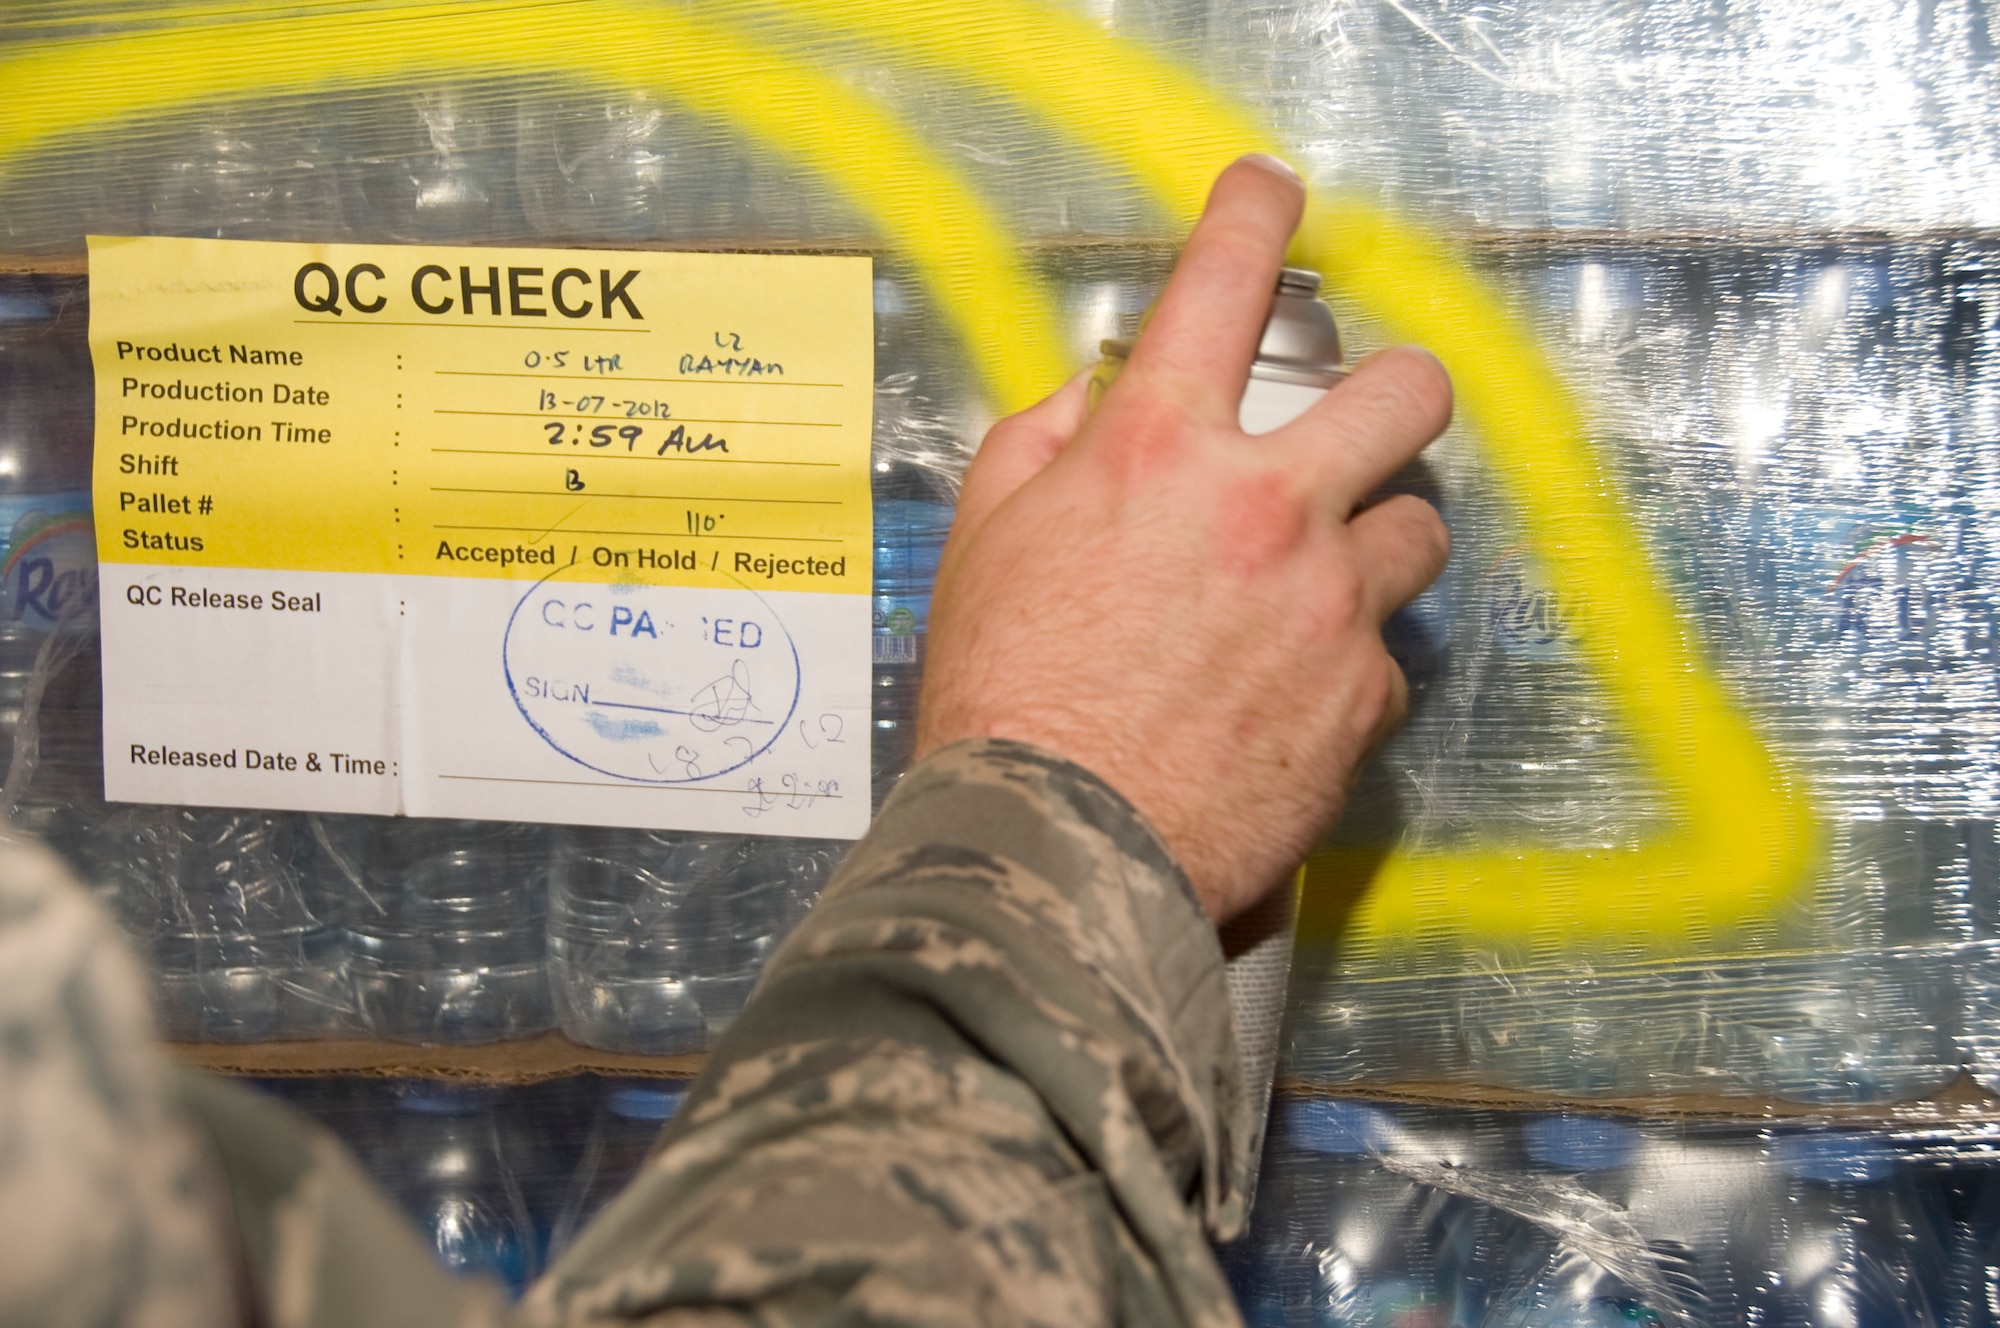 Senior Airman Ryan Smith, 379th Expeditionary Medical Group Bioenvironmental environmental program manager, spray paints a pallet of bottled water July 20, 2012. After each lot of water has been cleared and deemed safe for consumption, Smith marks the pallet of water with a large, yellow ‘C’. He conducts bacteriological tests on every batch of water received. (U.S. Air Force photo/Senior Airman Bryan Swink)